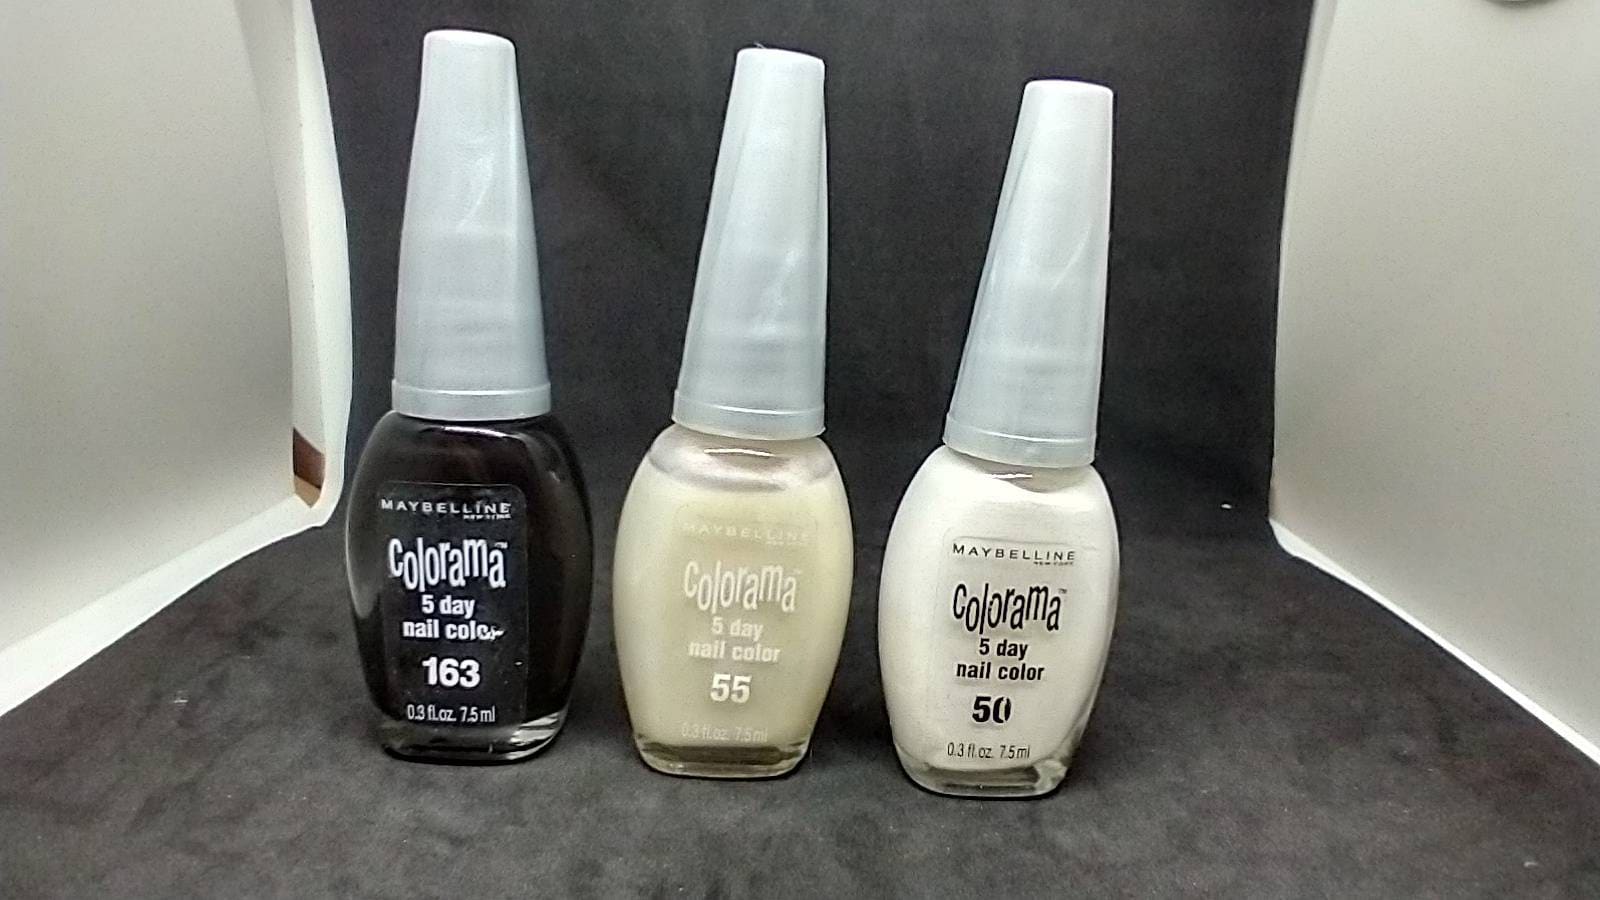 Maybelline Colorama nail polish review and swatches by Nail Lacquer UK